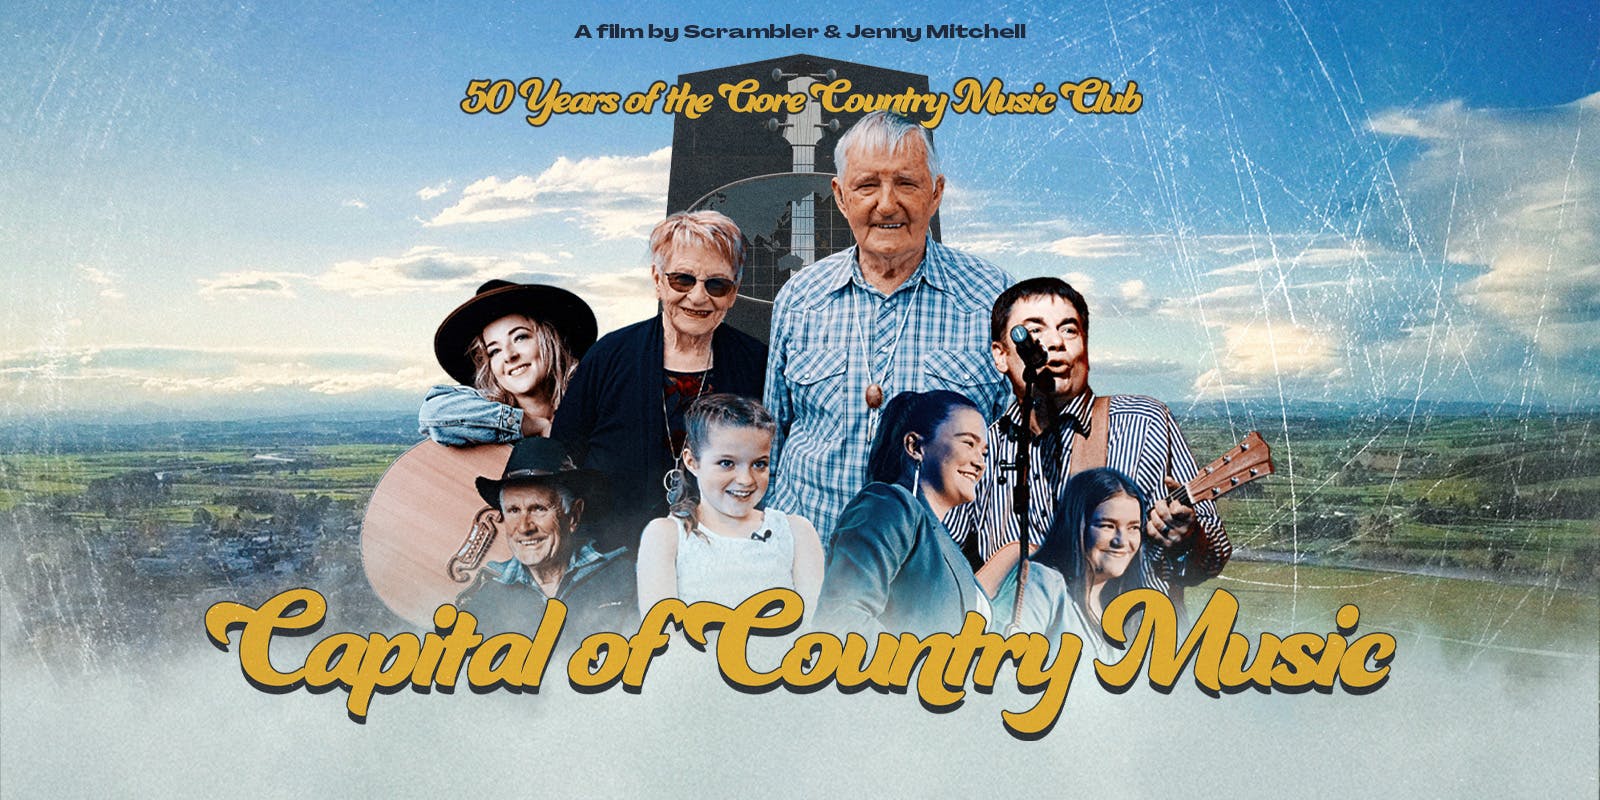 Premiere: Capital of Country Music